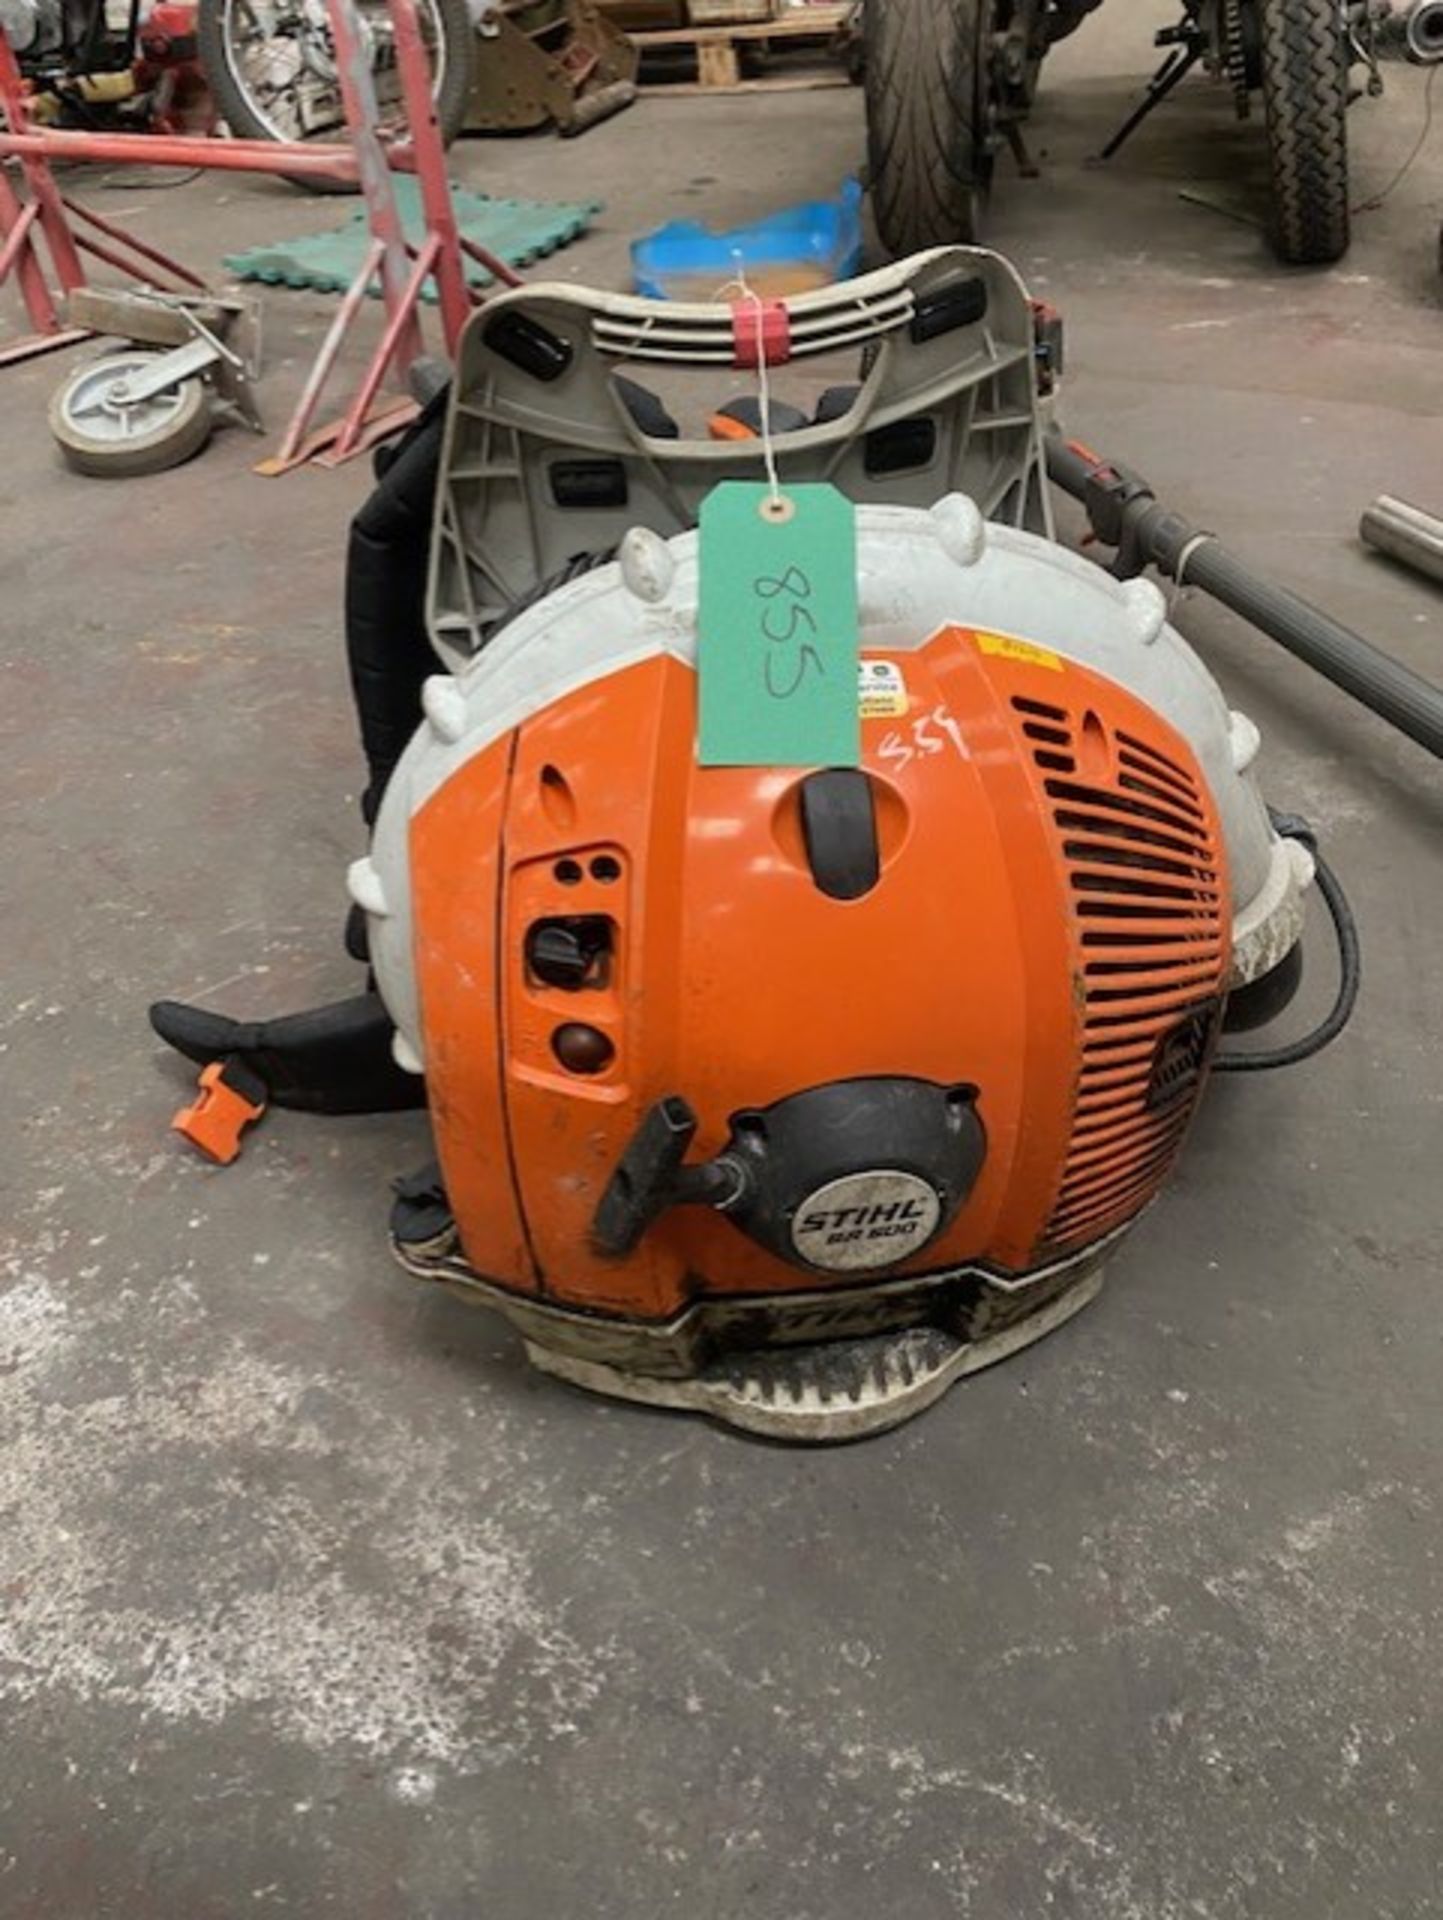 Stihl BR600 Backpack Blower sold as seen